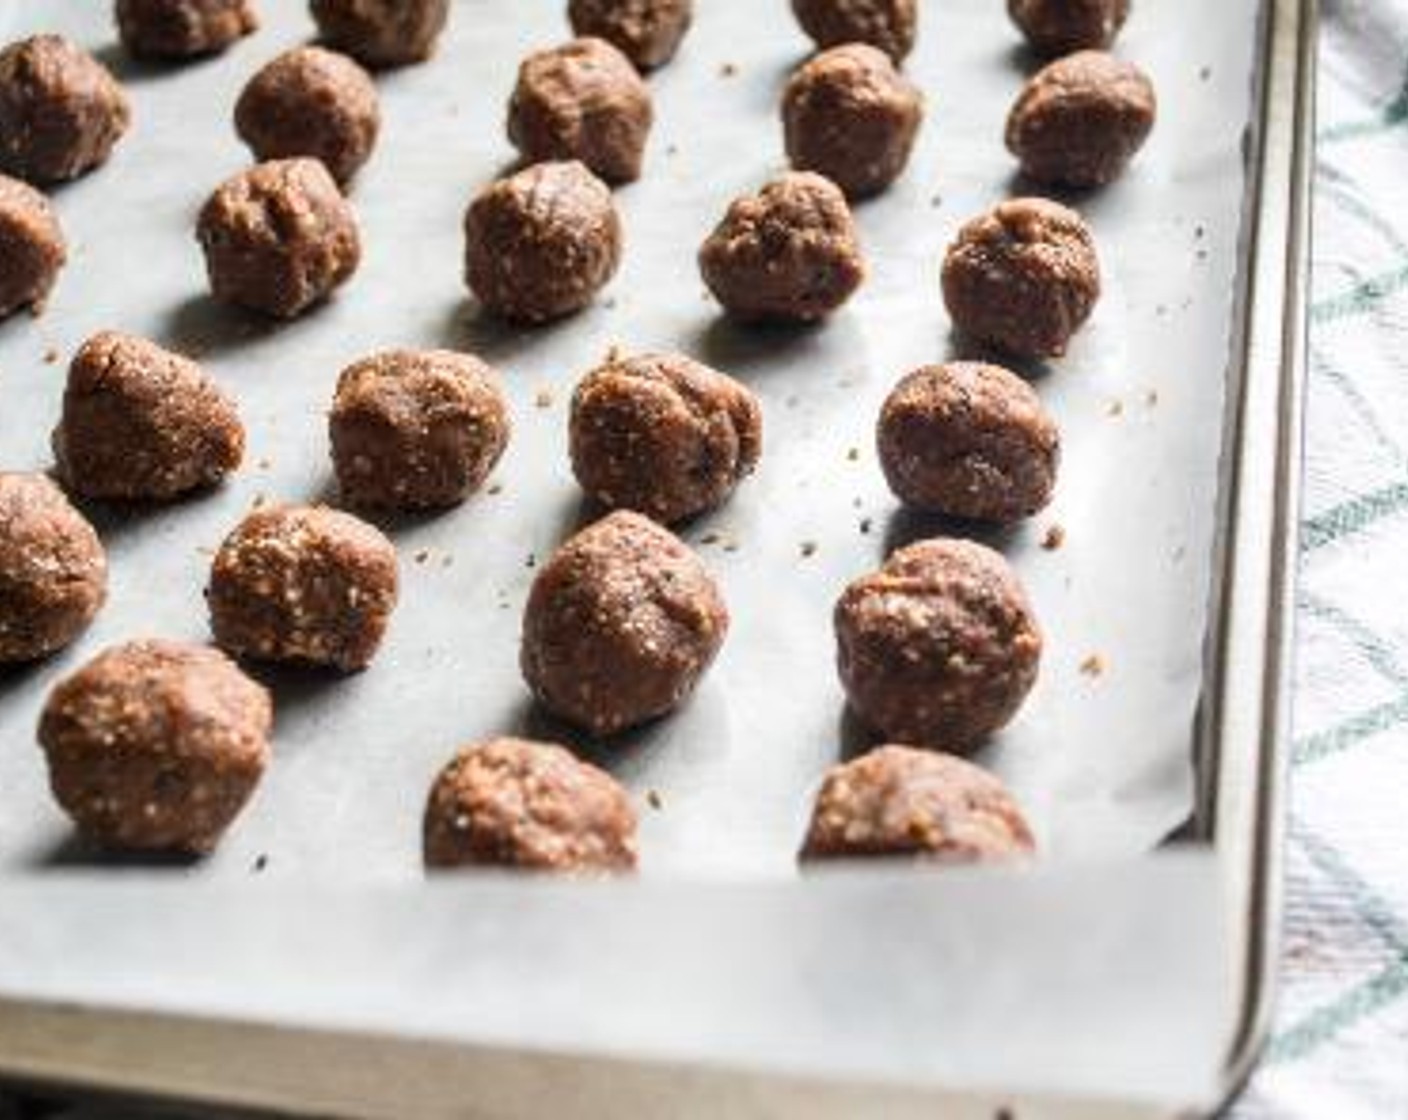 step 4 Roll into 1-inch balls, place on cookie sheet lined with wax paper and put in refrigerator for 20-30 minutes.